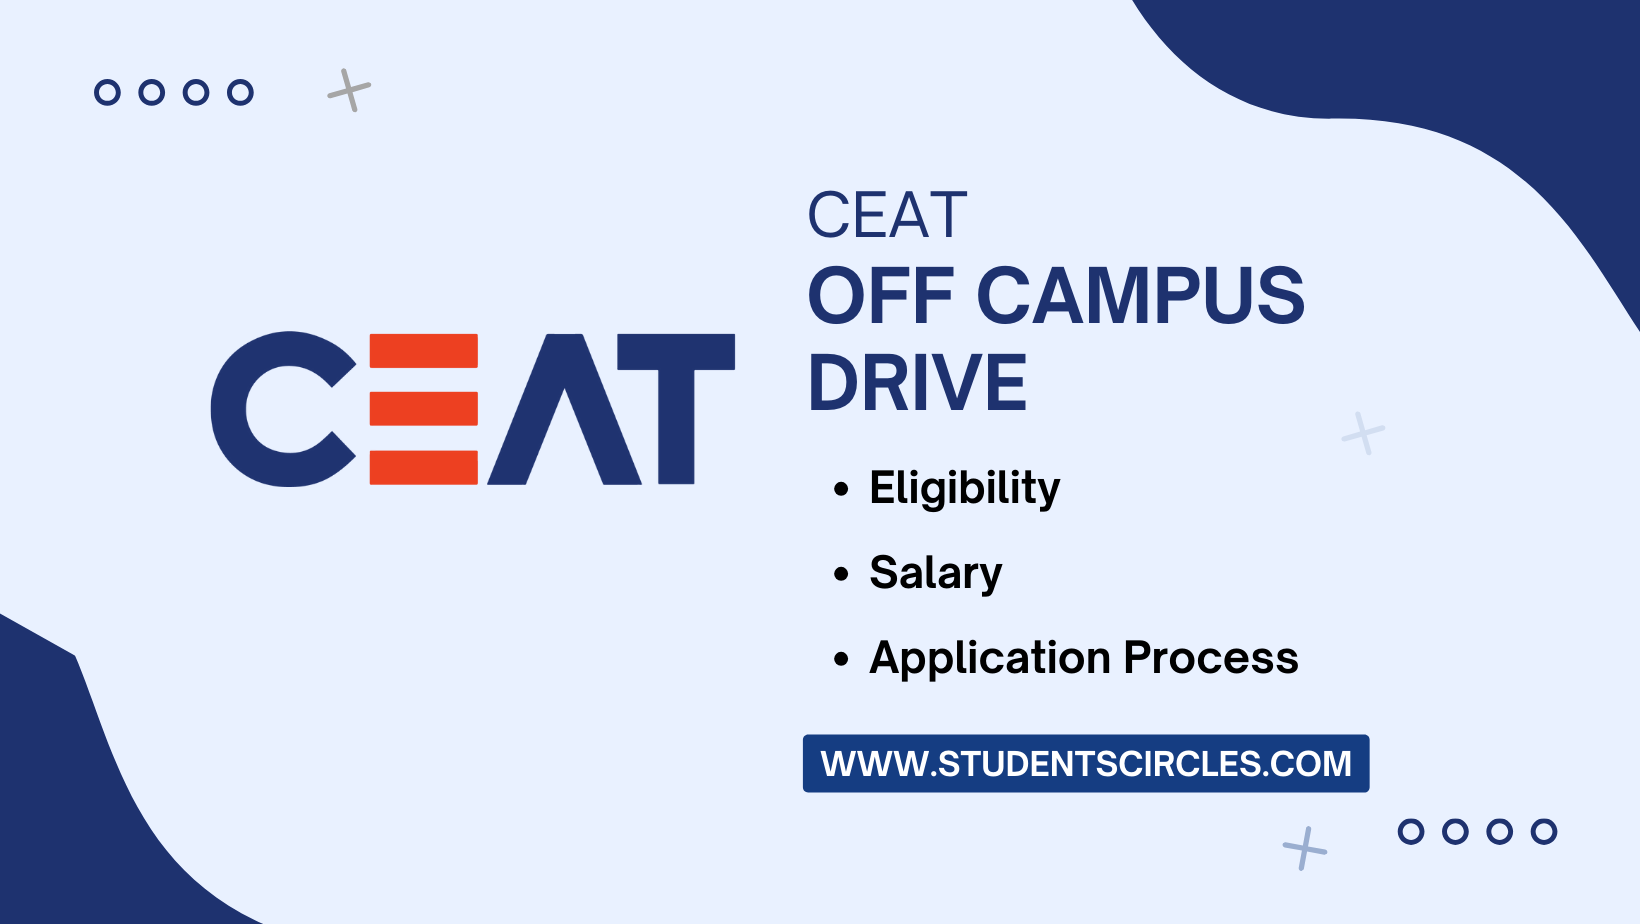 CEAT Off Campus Drive